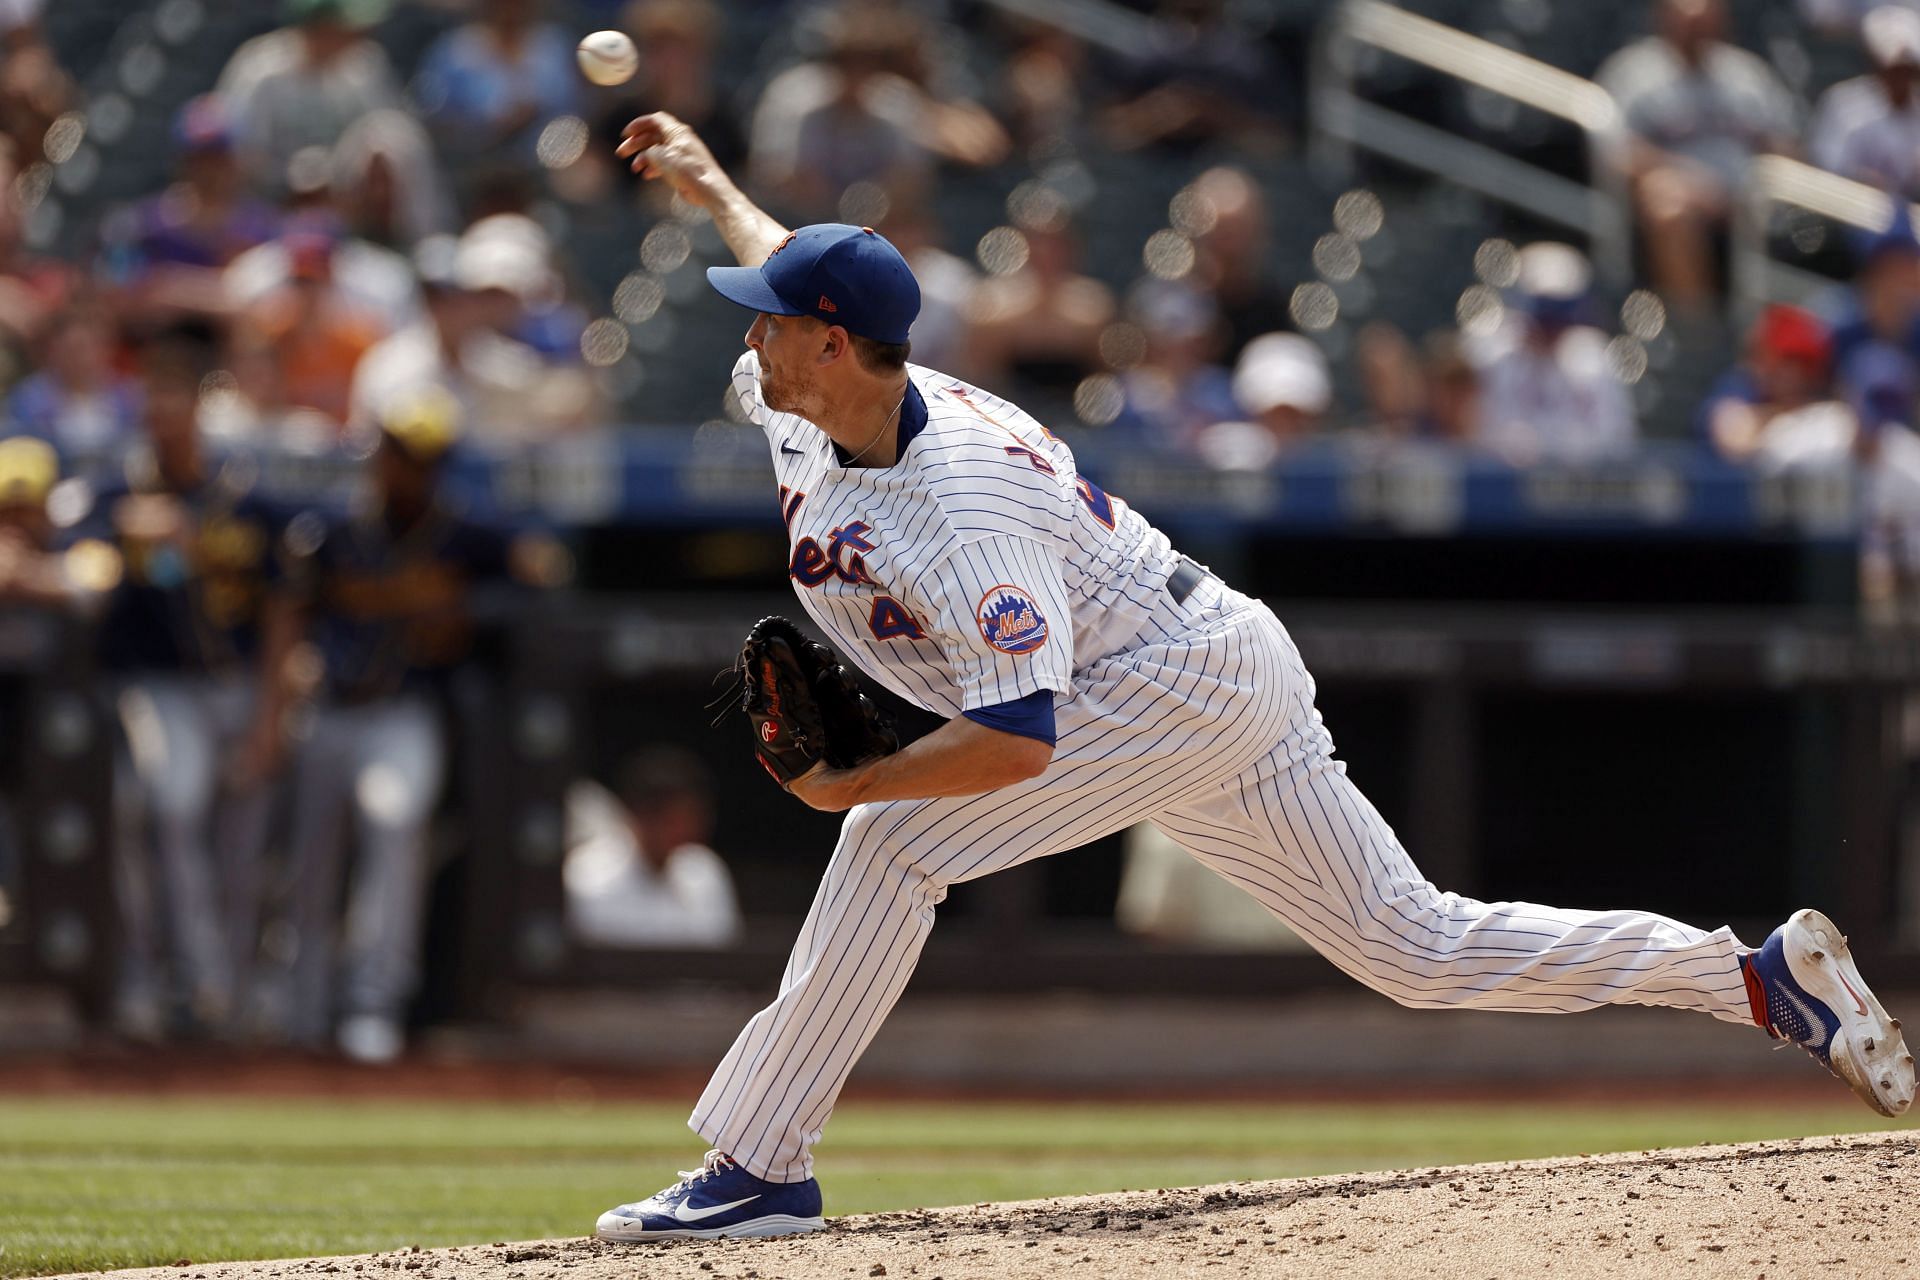 Jacob deGrom pitches during a Milwaukee Brewers vs New York Mets game.